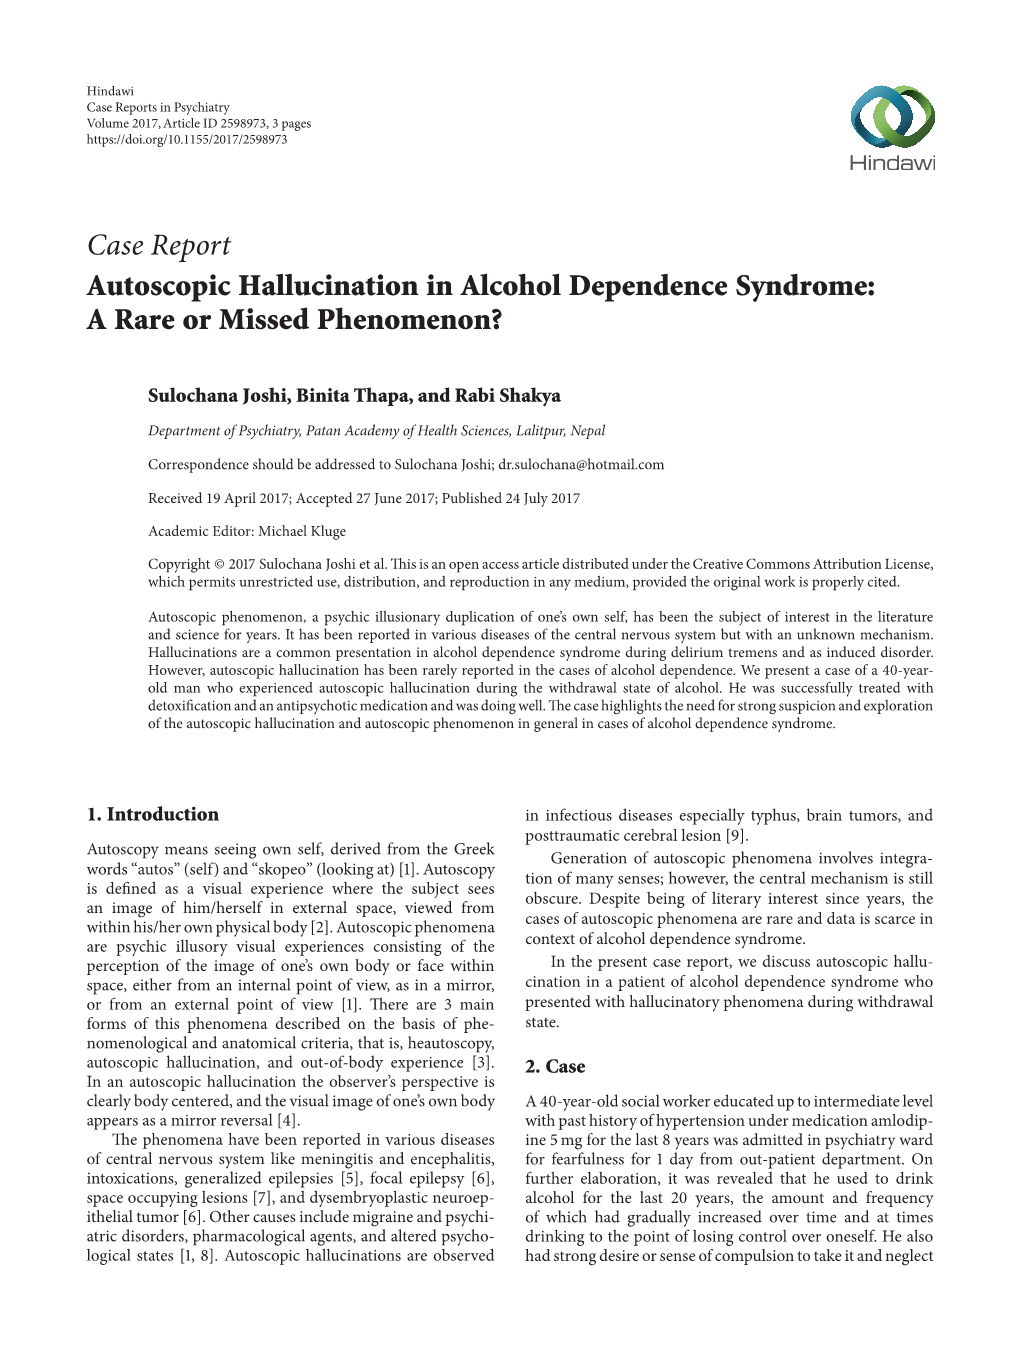 Autoscopic Hallucination in Alcohol Dependence Syndrome: a Rare Or Missed Phenomenon?